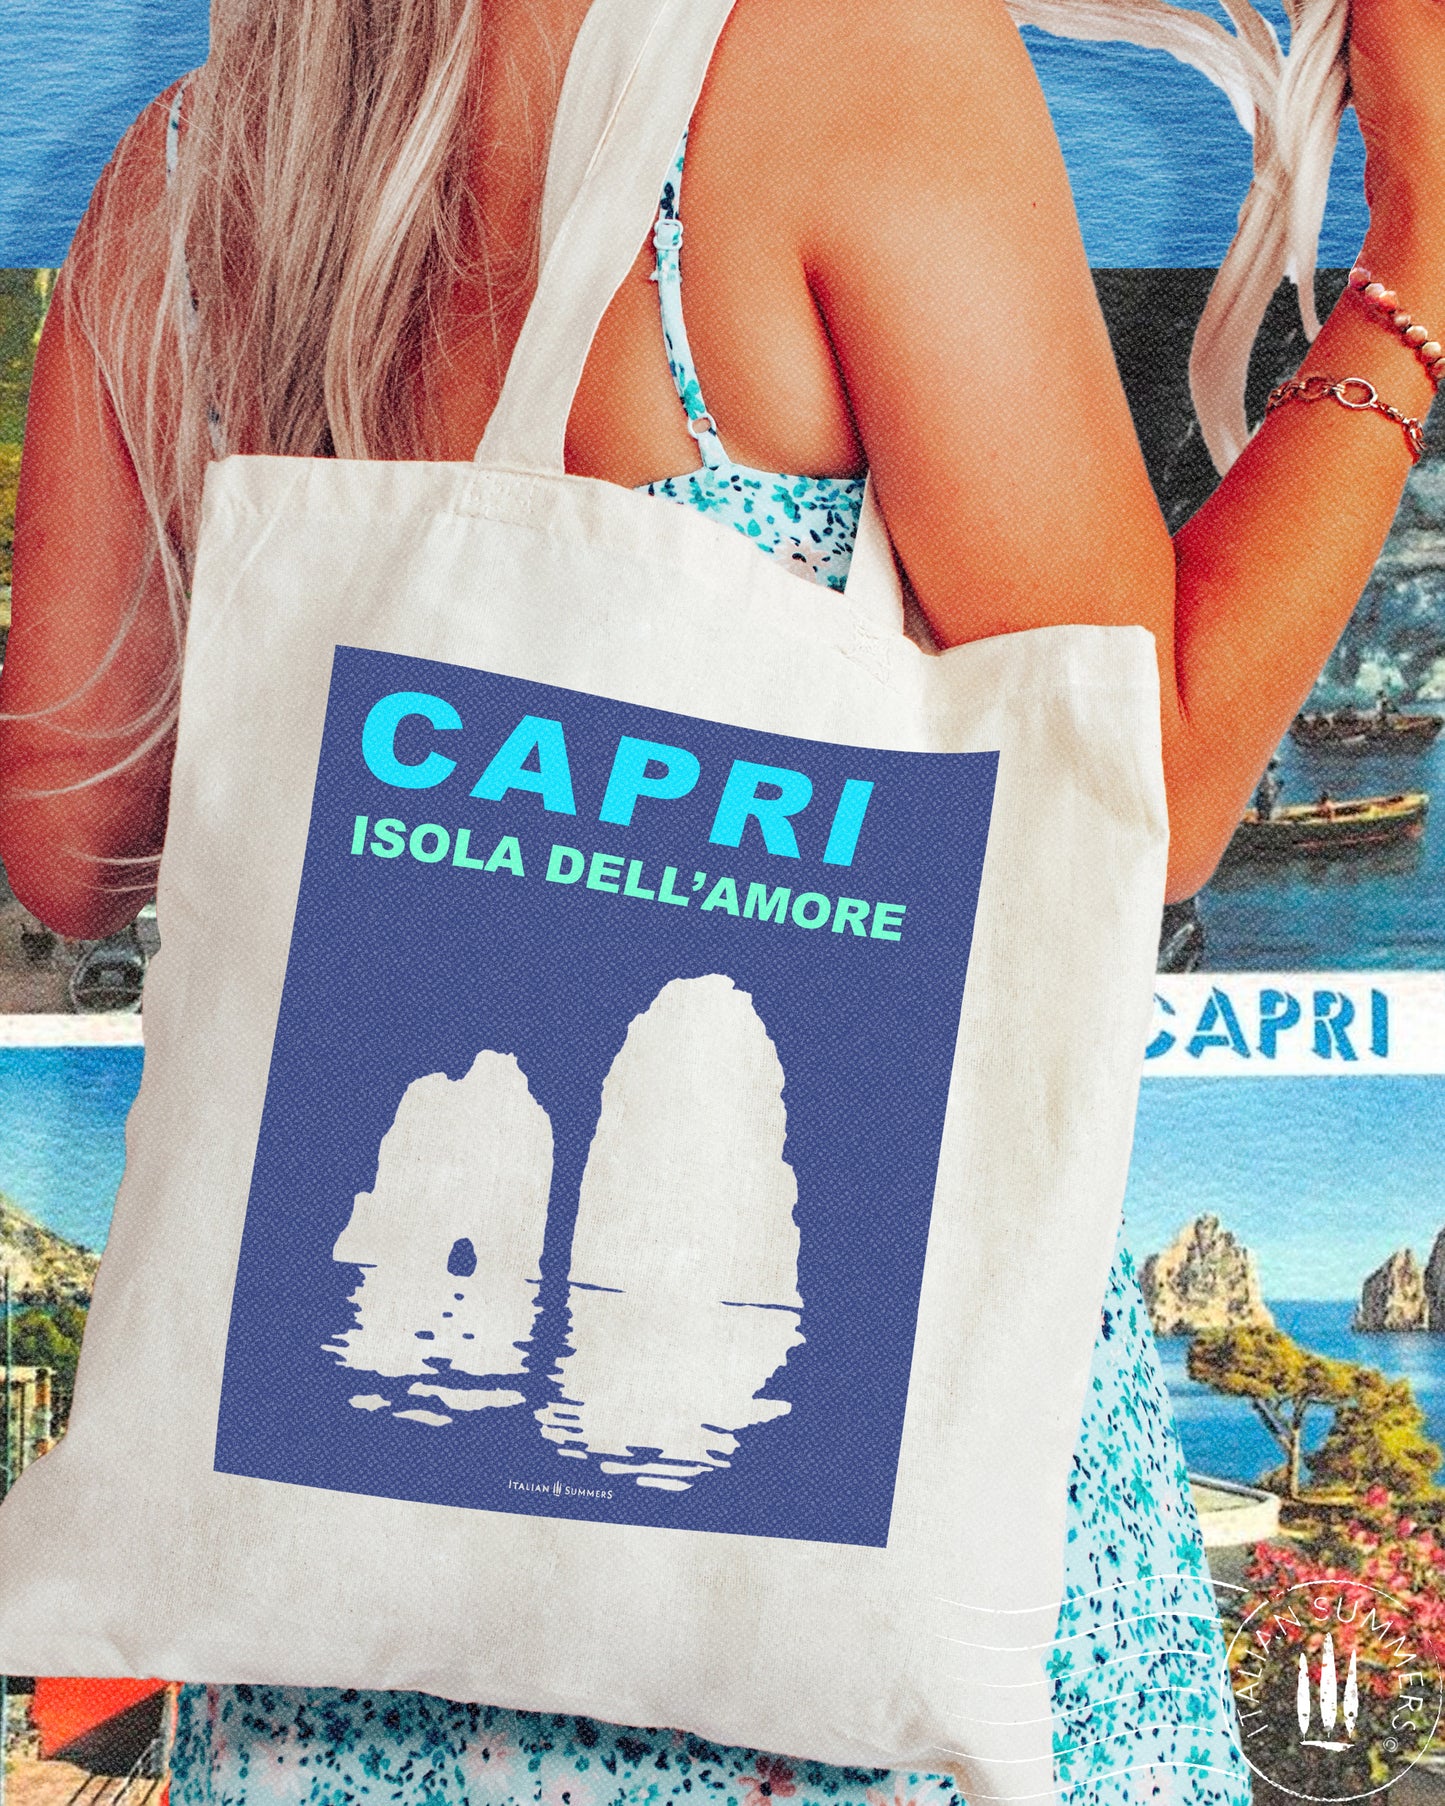 Italy inspired tote bag that represents a navy blue field containing a turqoise Capri text and under that the text Isola del Amore means Isand of love. Under the text there is the silhouet of the Faraglioni in white. Designed by Italian Summers